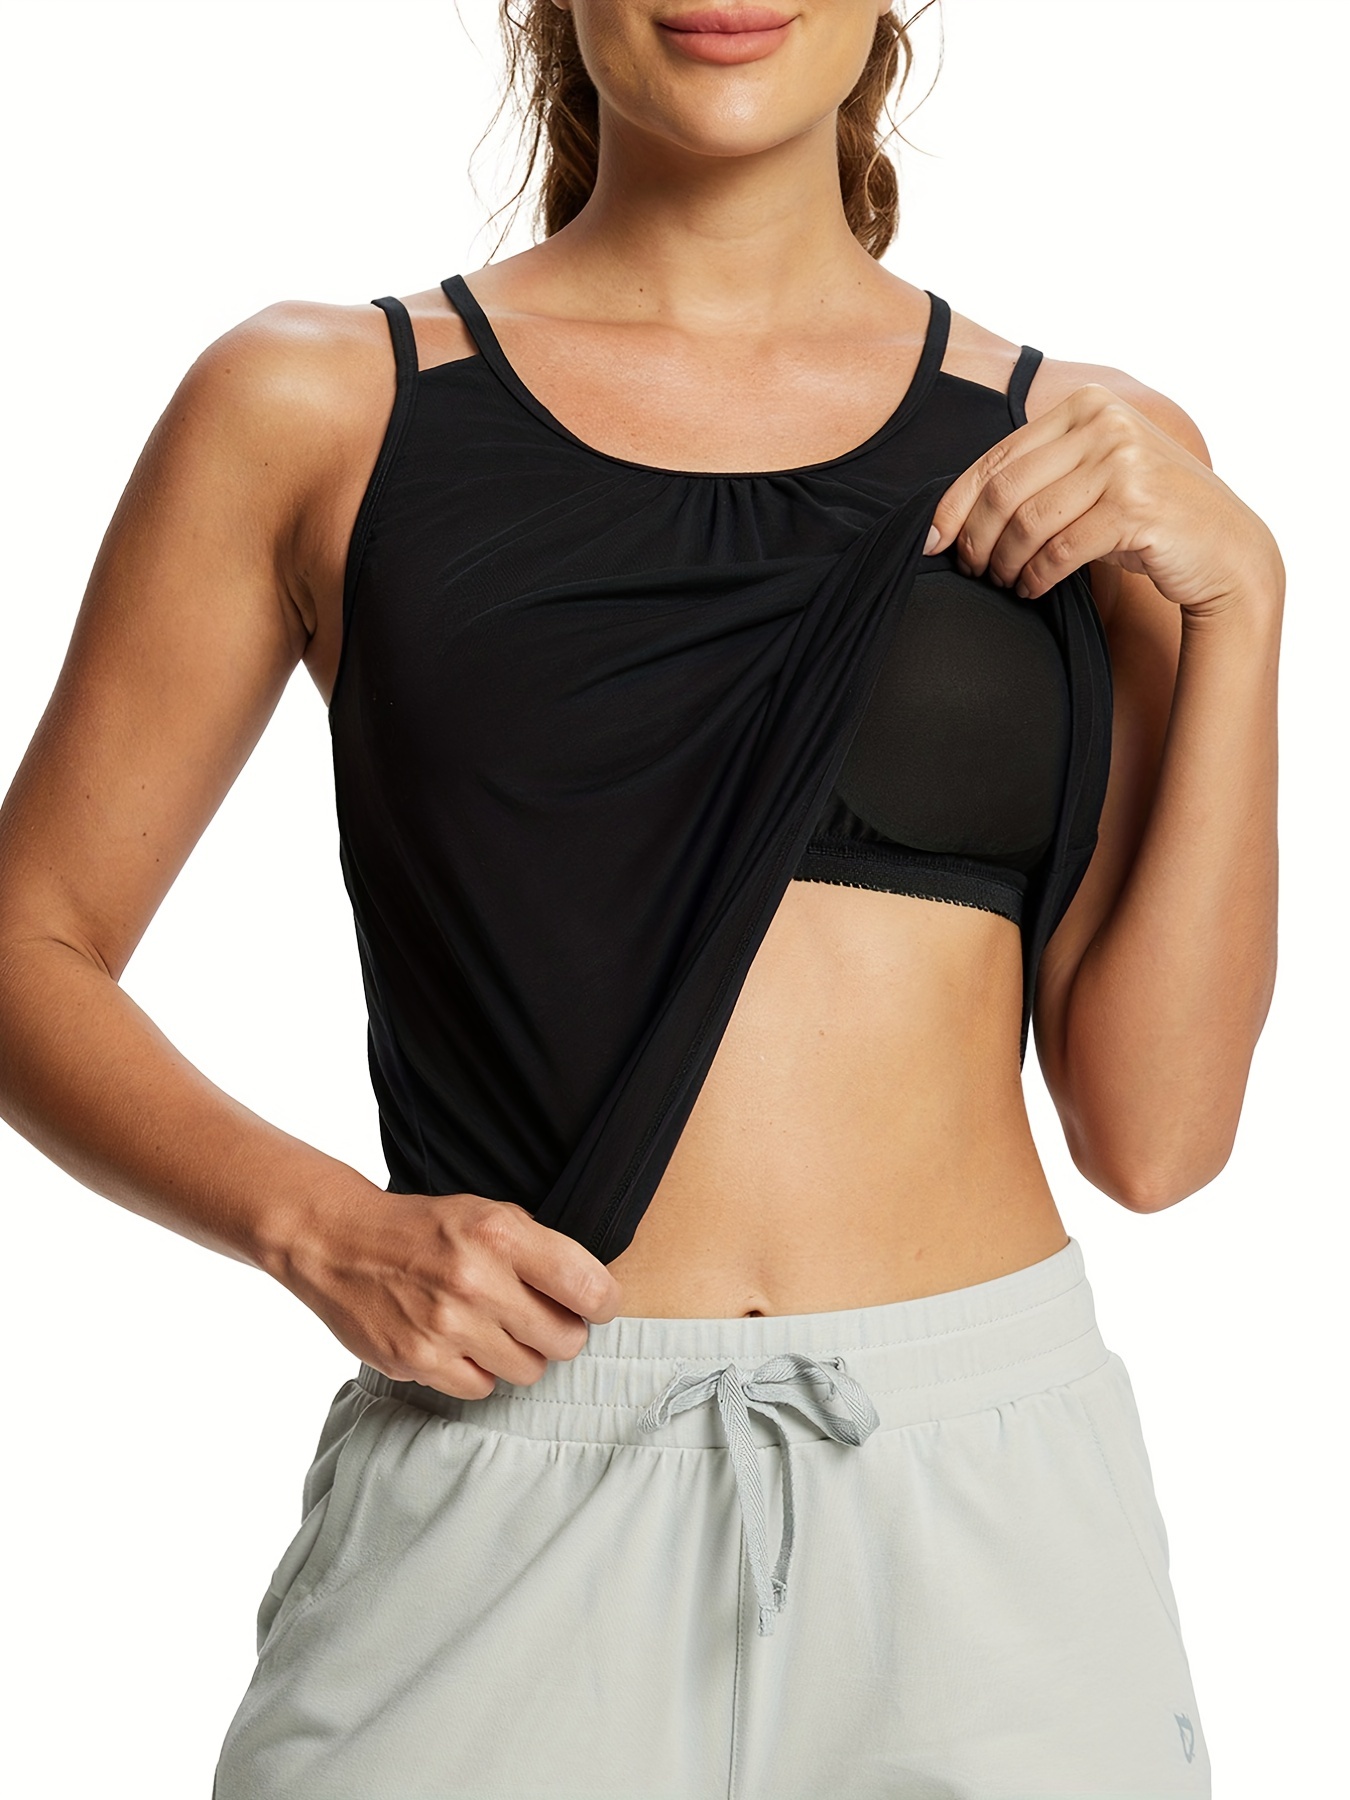  Loose-Fitting Tank Top with Built-in Bra, Women's Tank Top with Built  in Bras, Adjustable Summer Cami Shirts (Black,S) : Sports & Outdoors